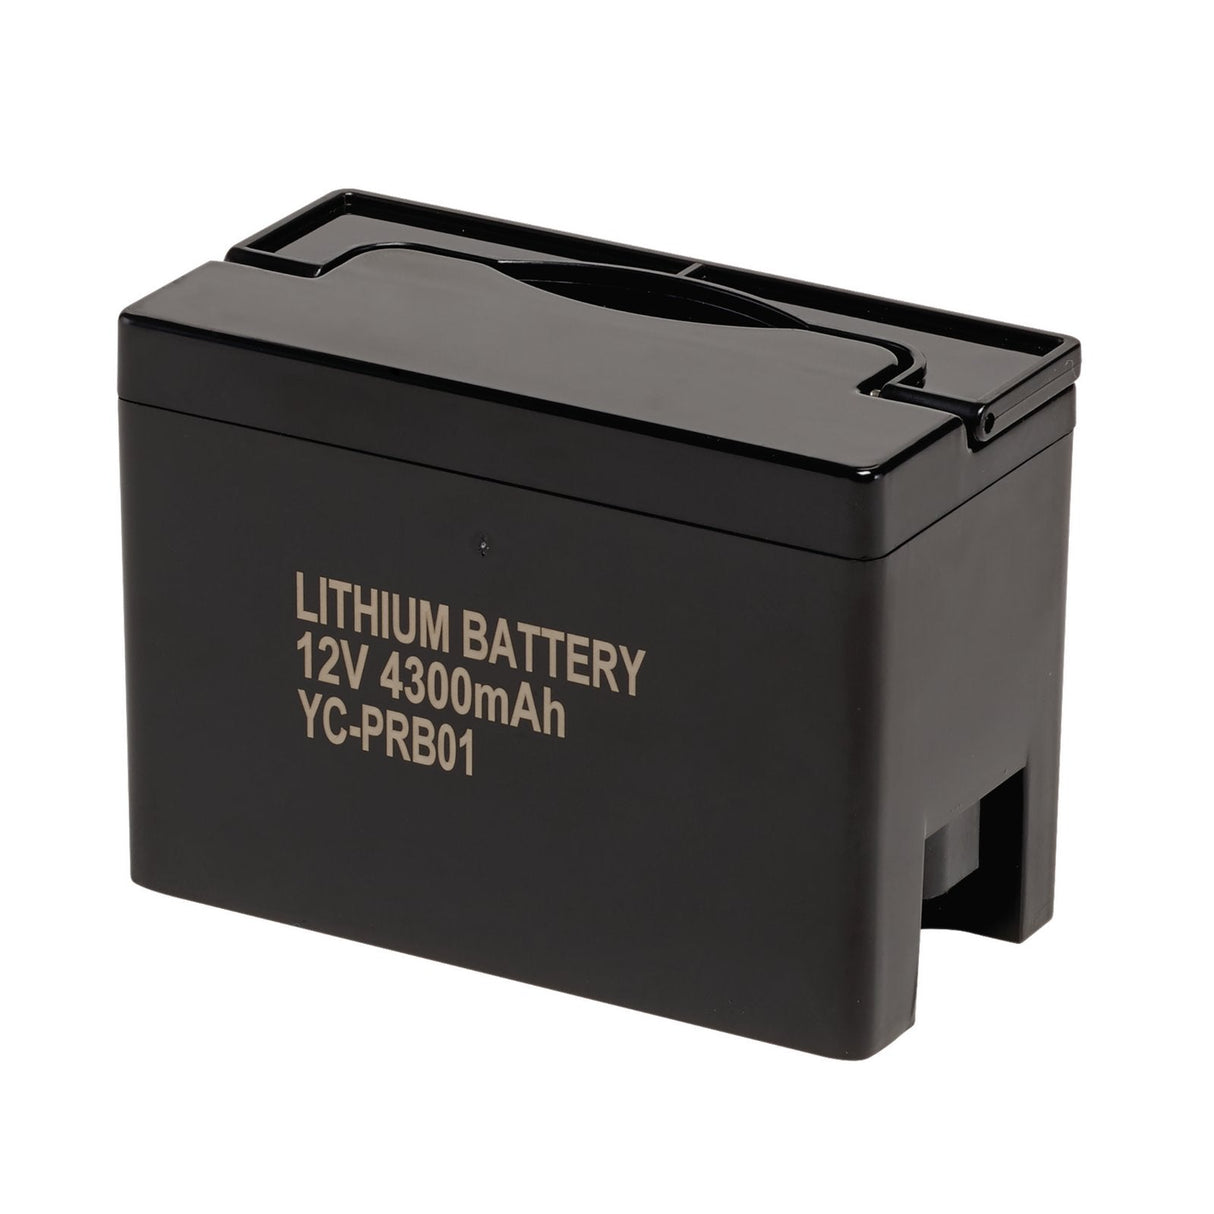 Draper Battery For Use With Welding Helmet - Stock No. 02518 - AWHAFVS-03 - Farming Parts